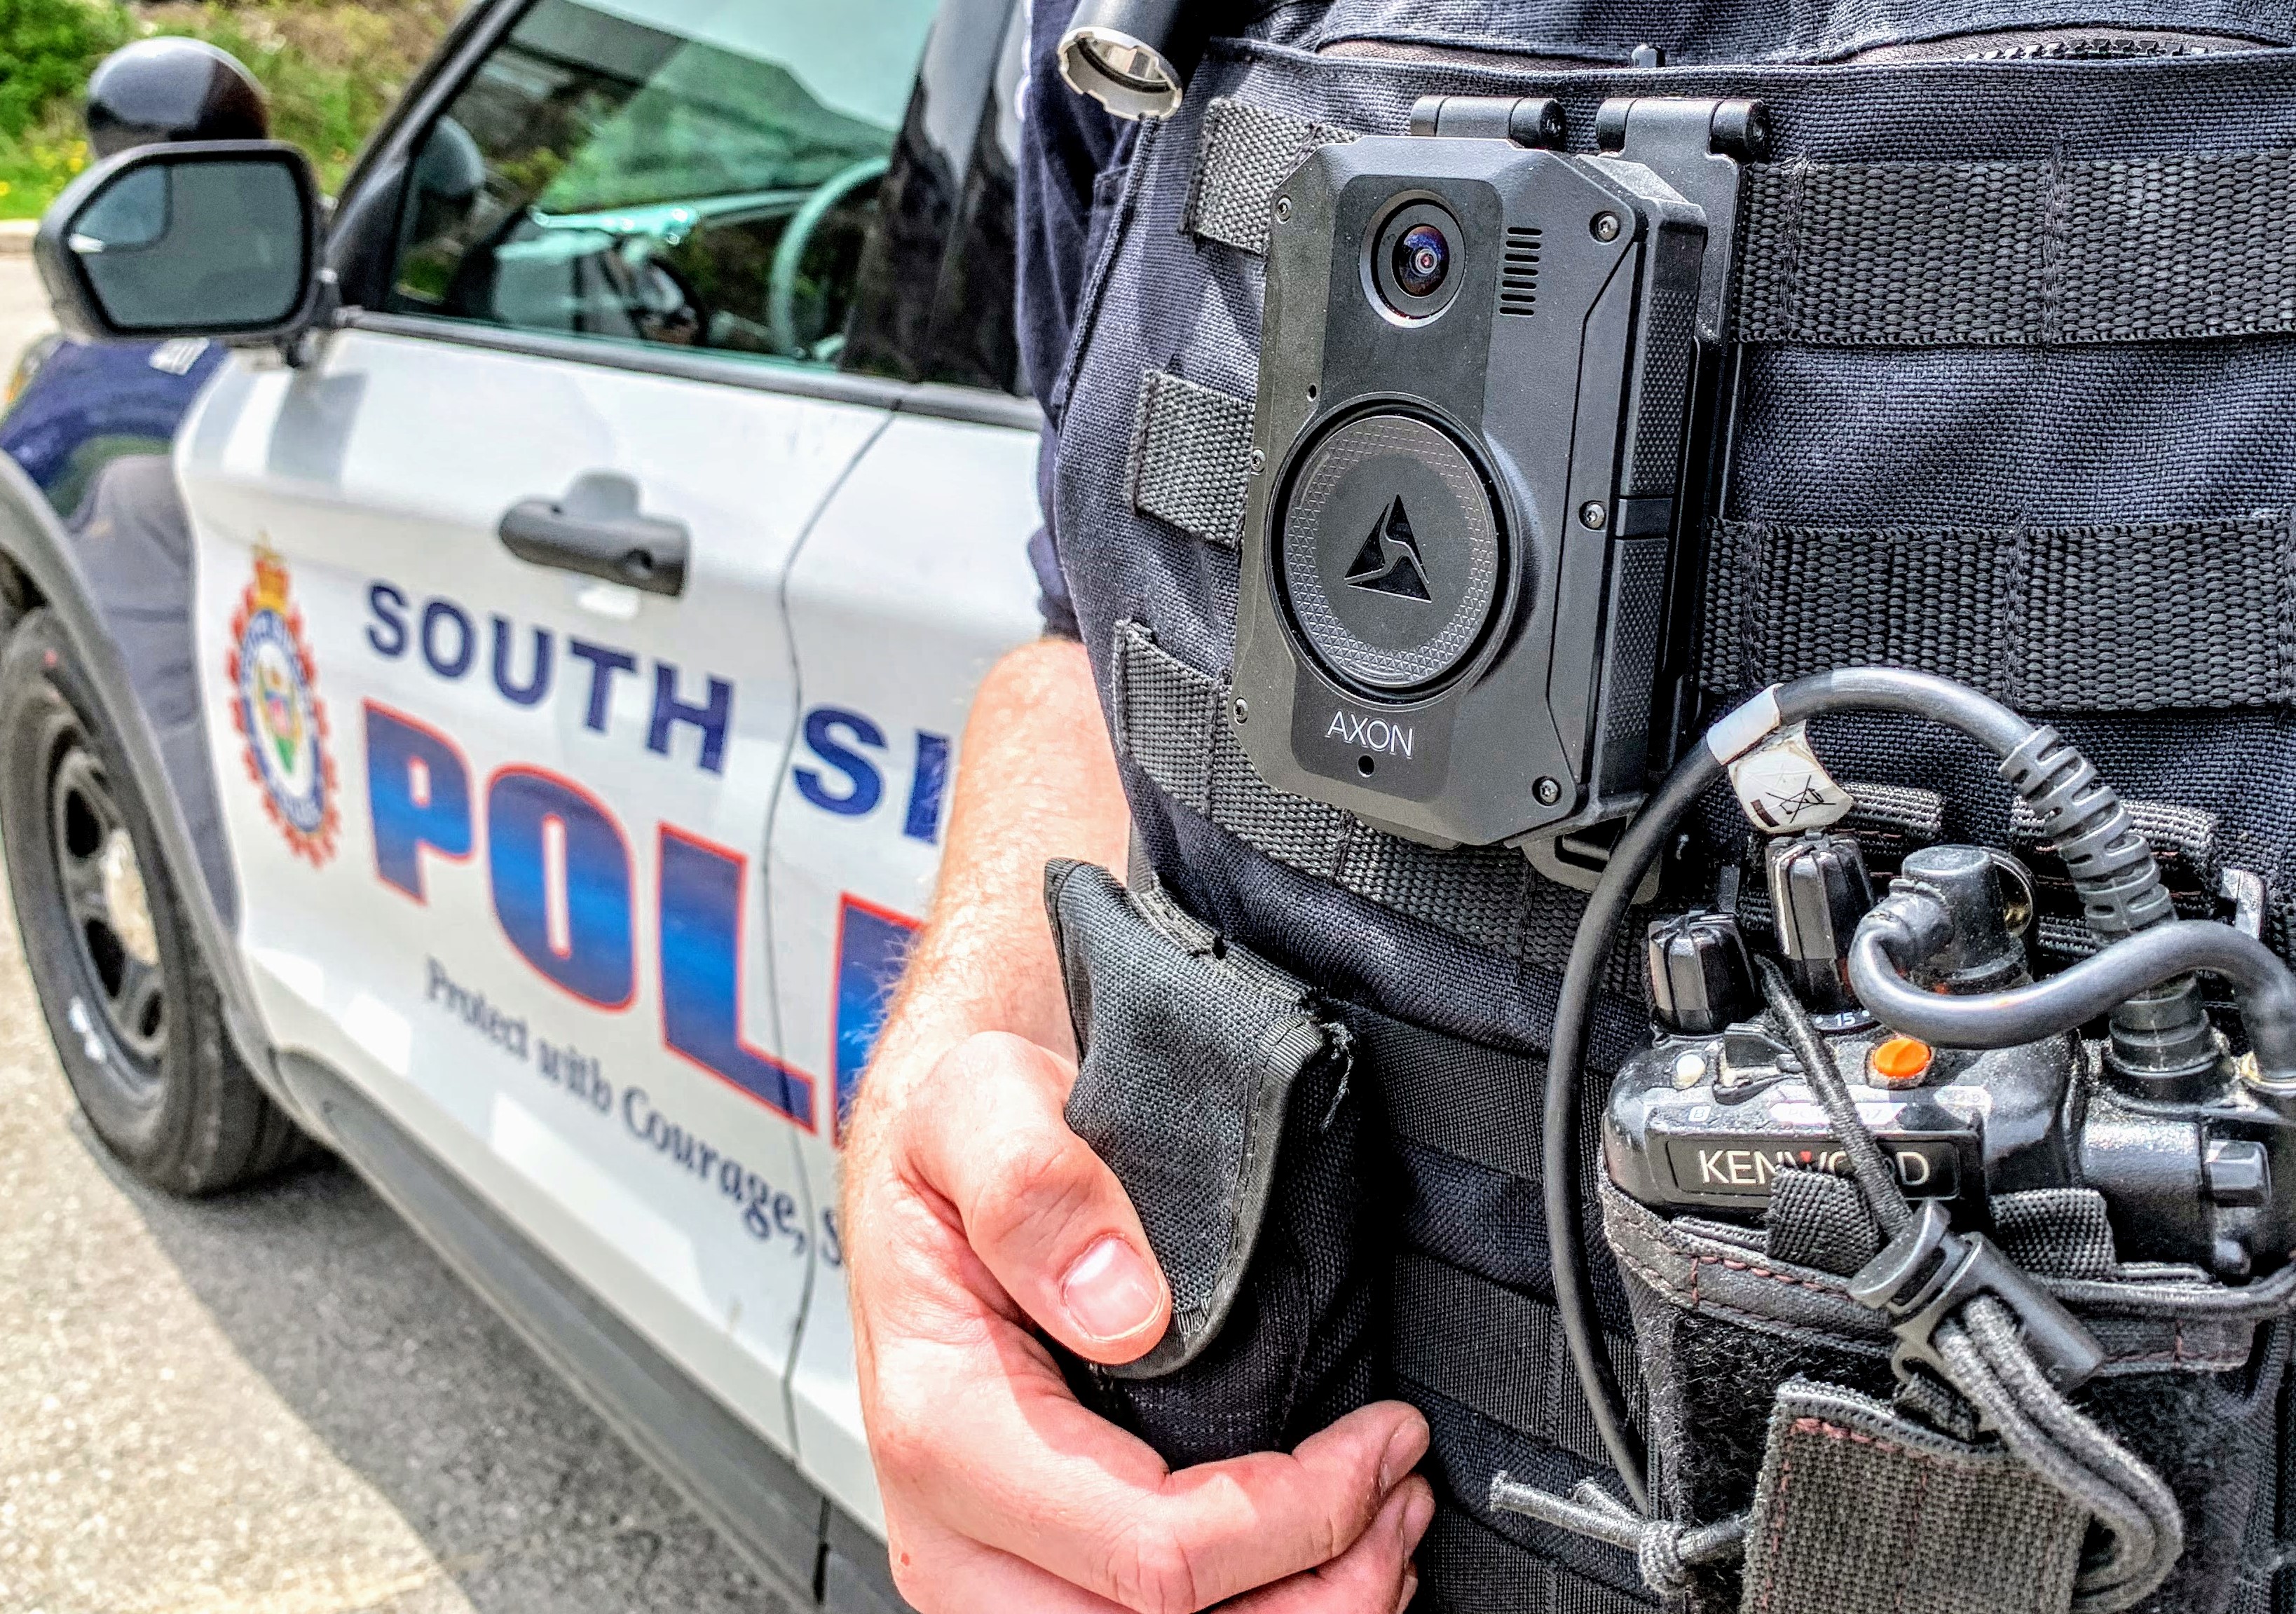 Quebec provincial police will test out body cameras in 4 regions